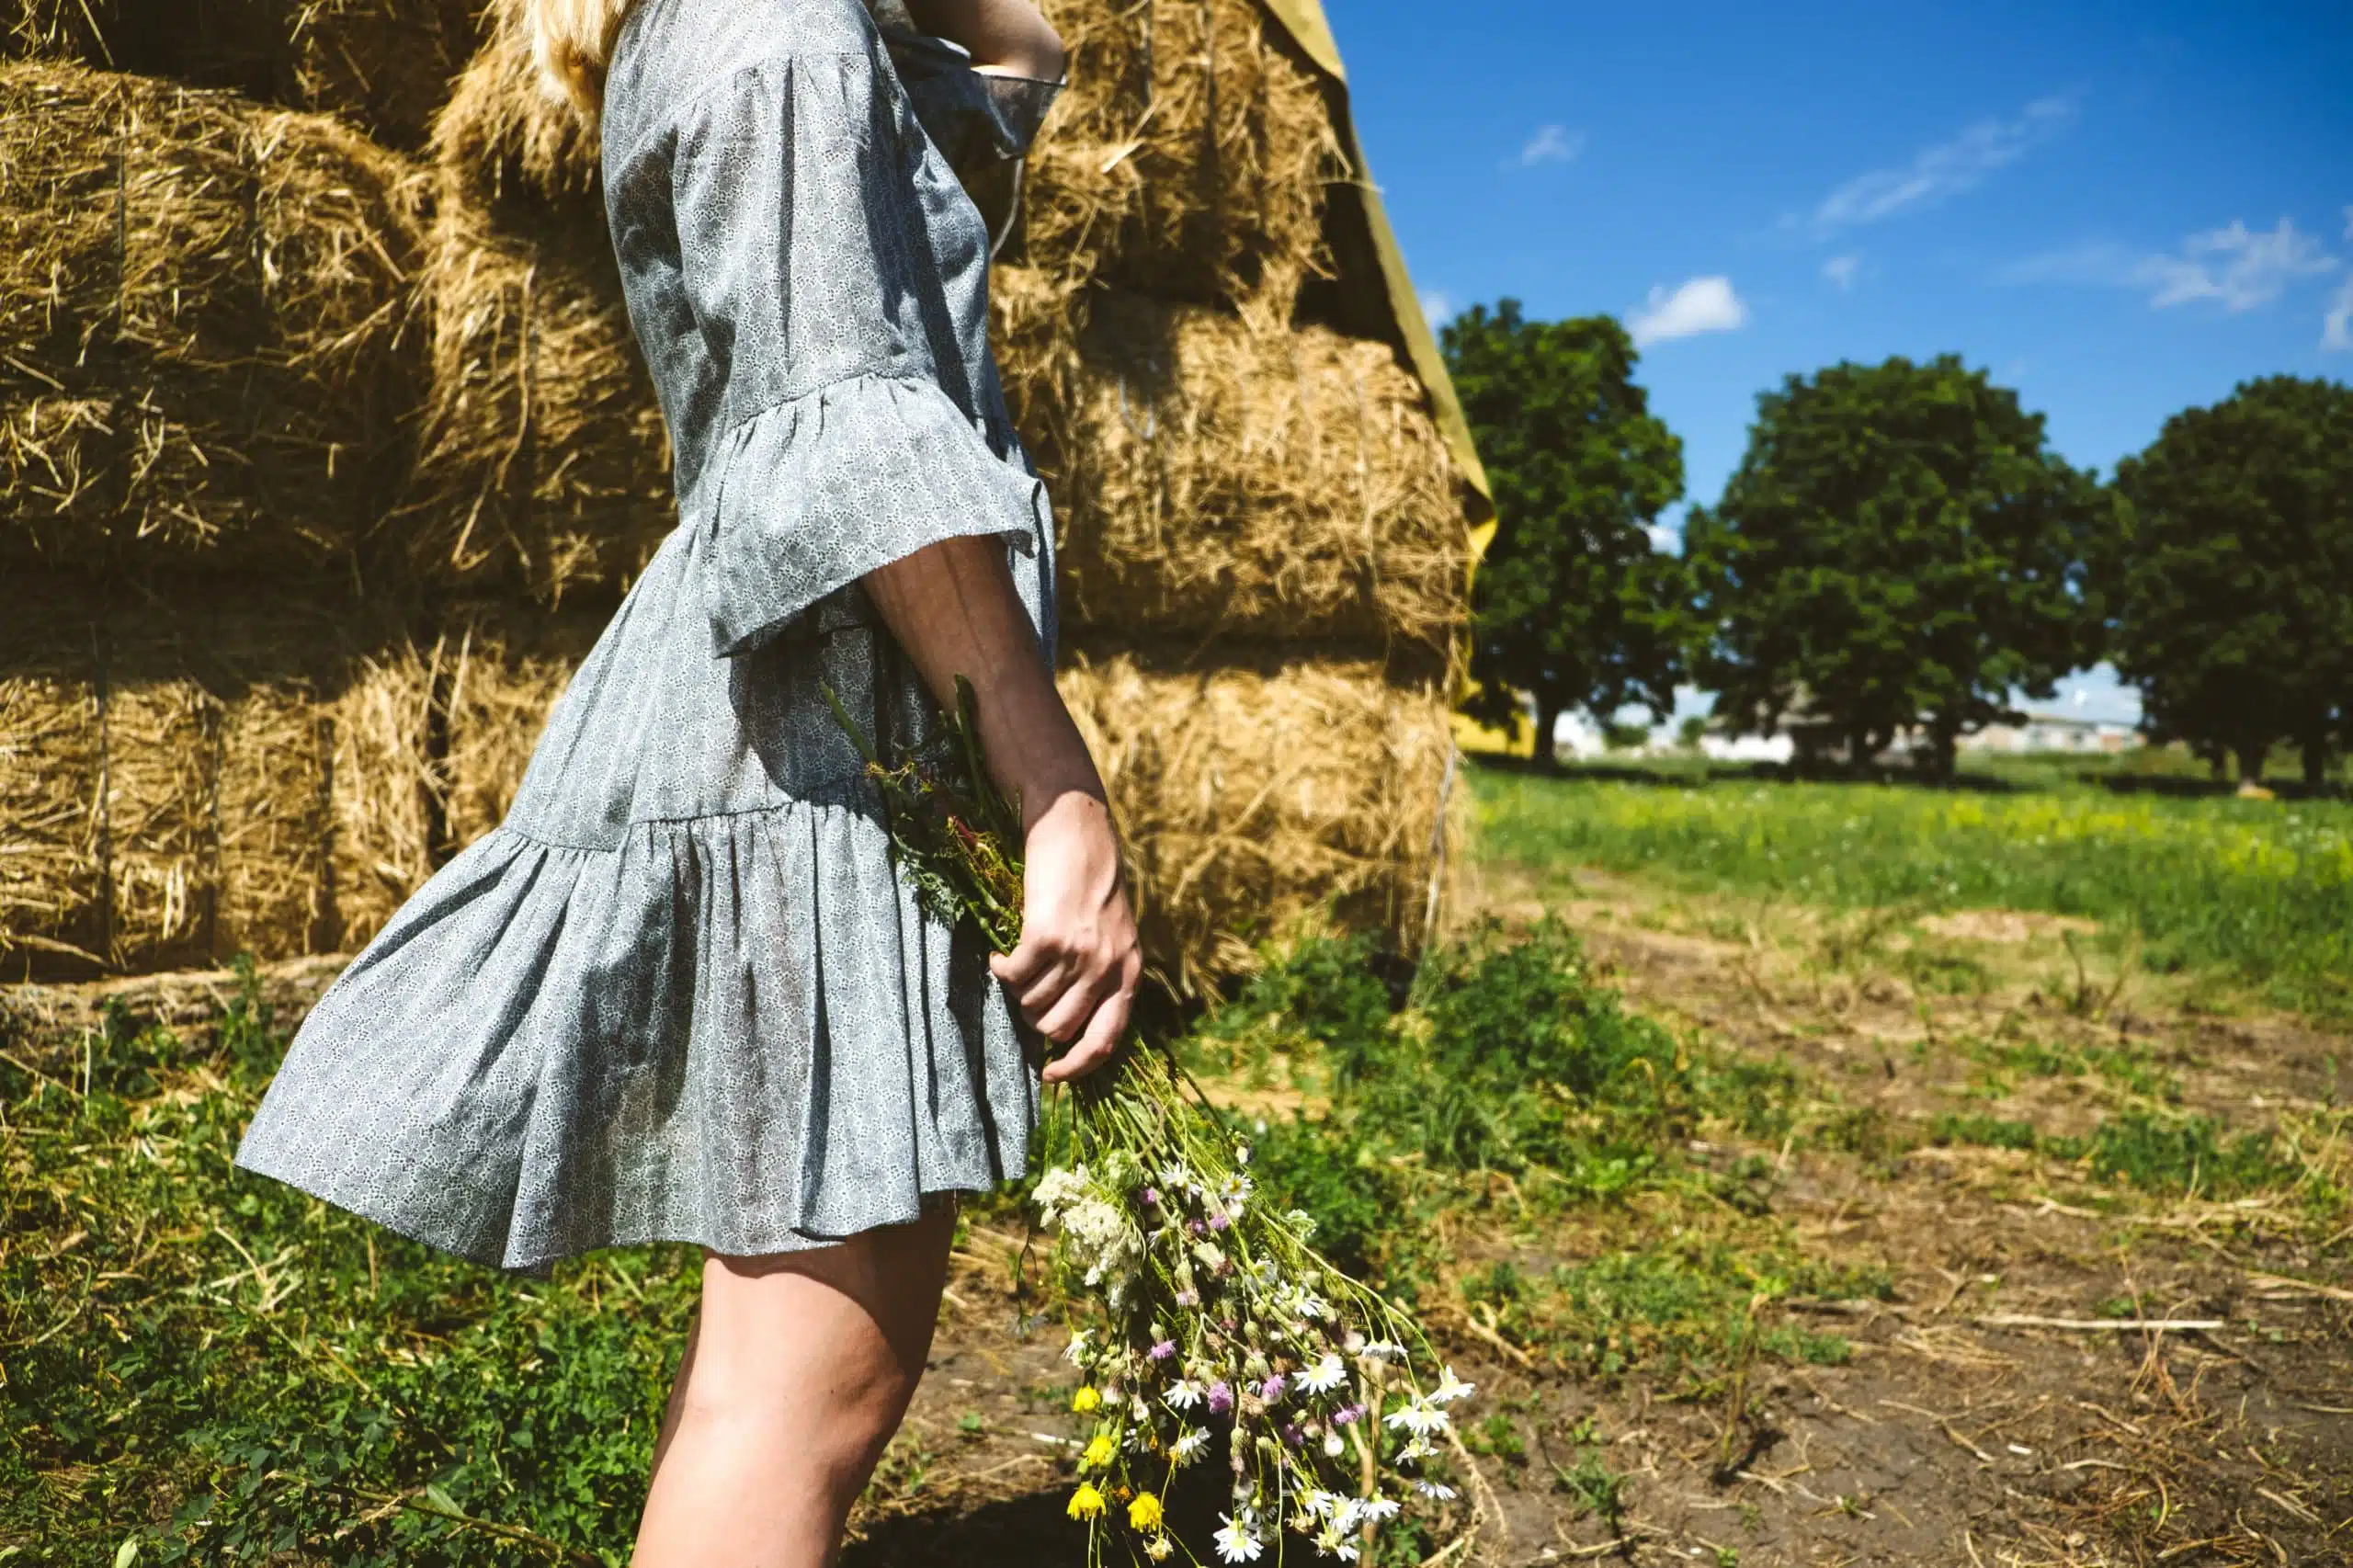 Young woman holding wild flowers, enjoying the farm life.